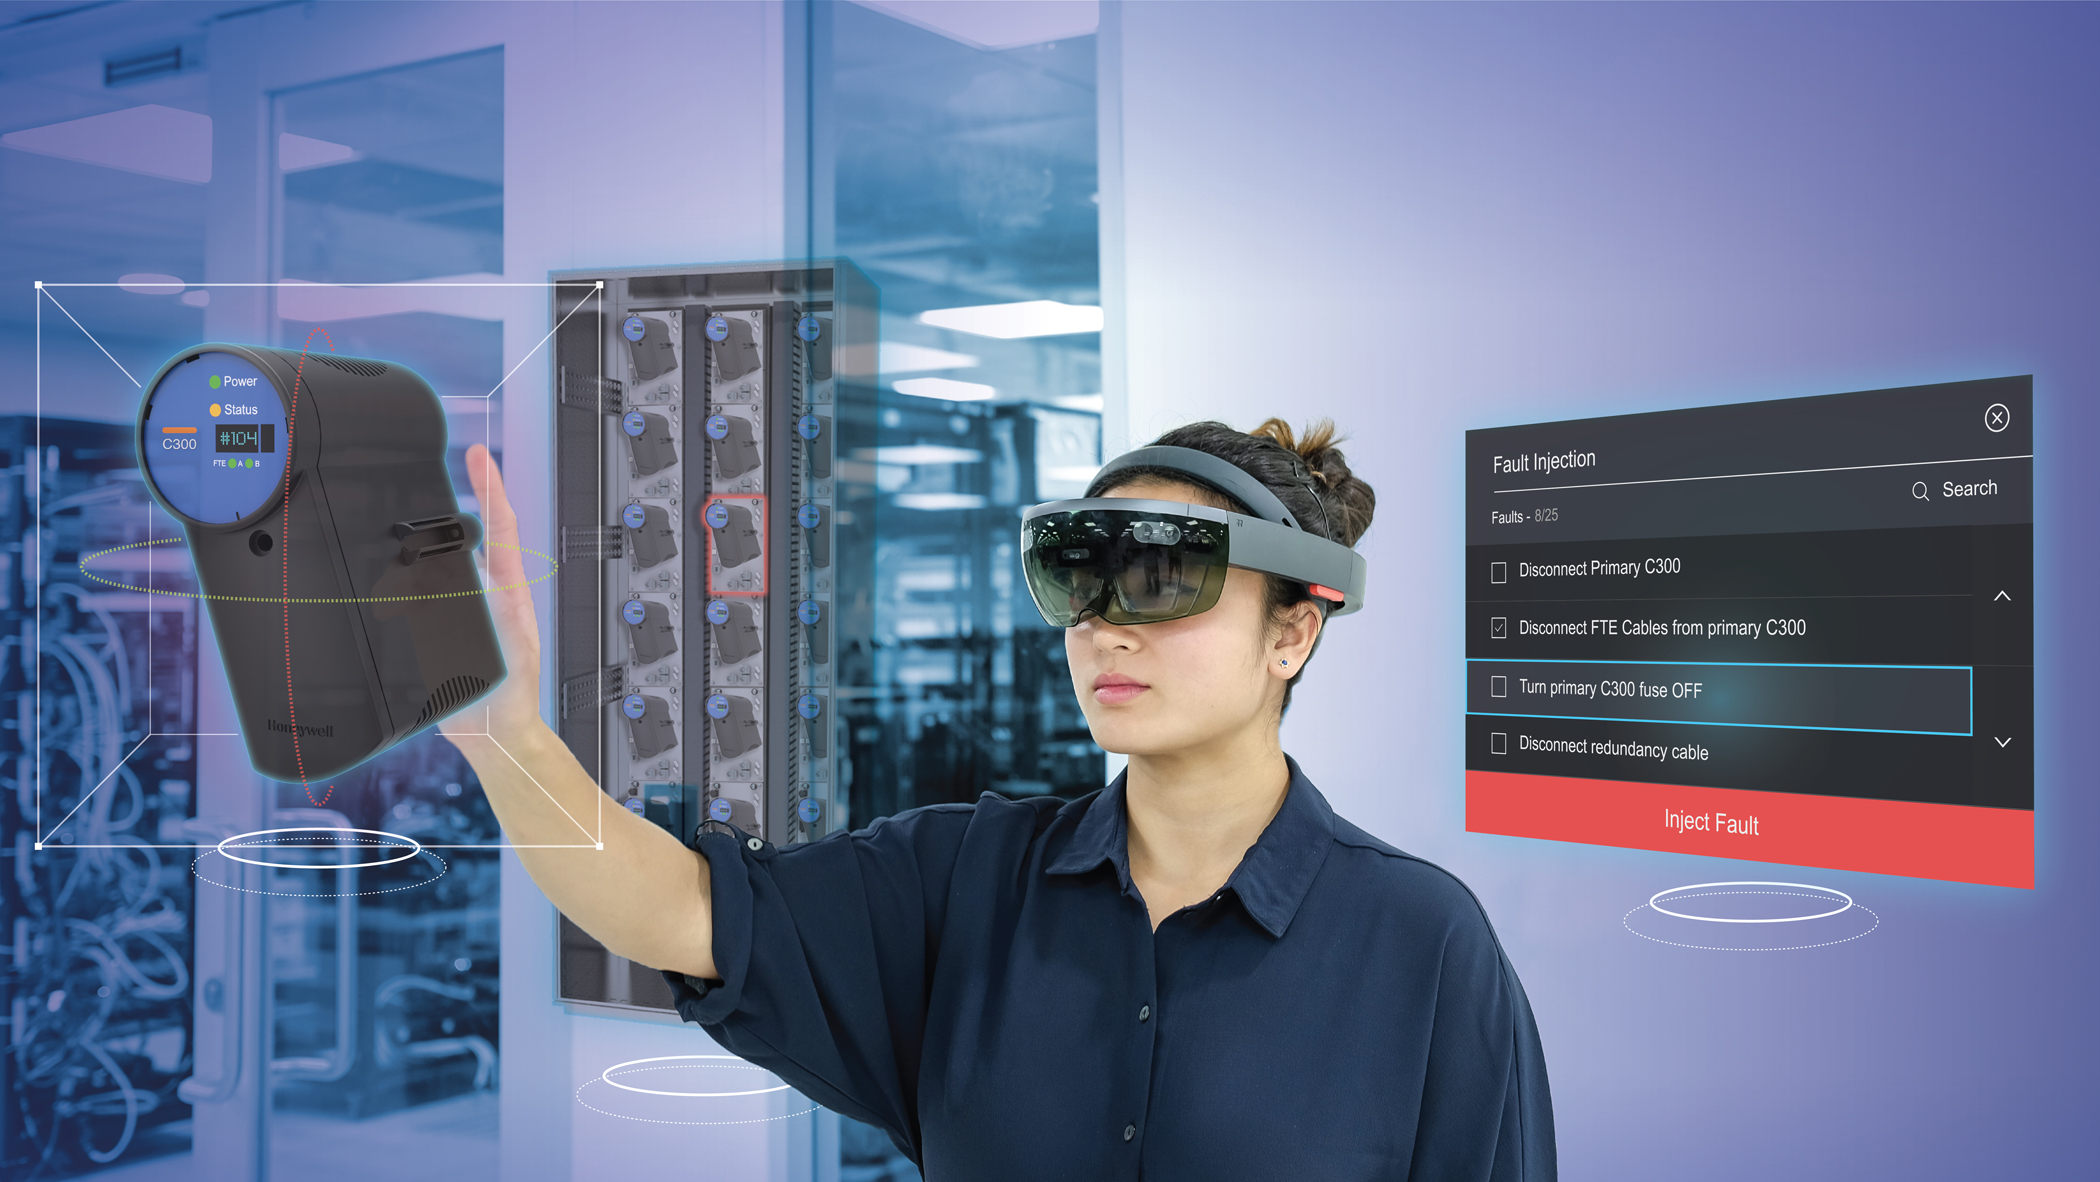 Honeywells cloud-based simulation tool uses a combination of augmented reality AR and virtual reality VR